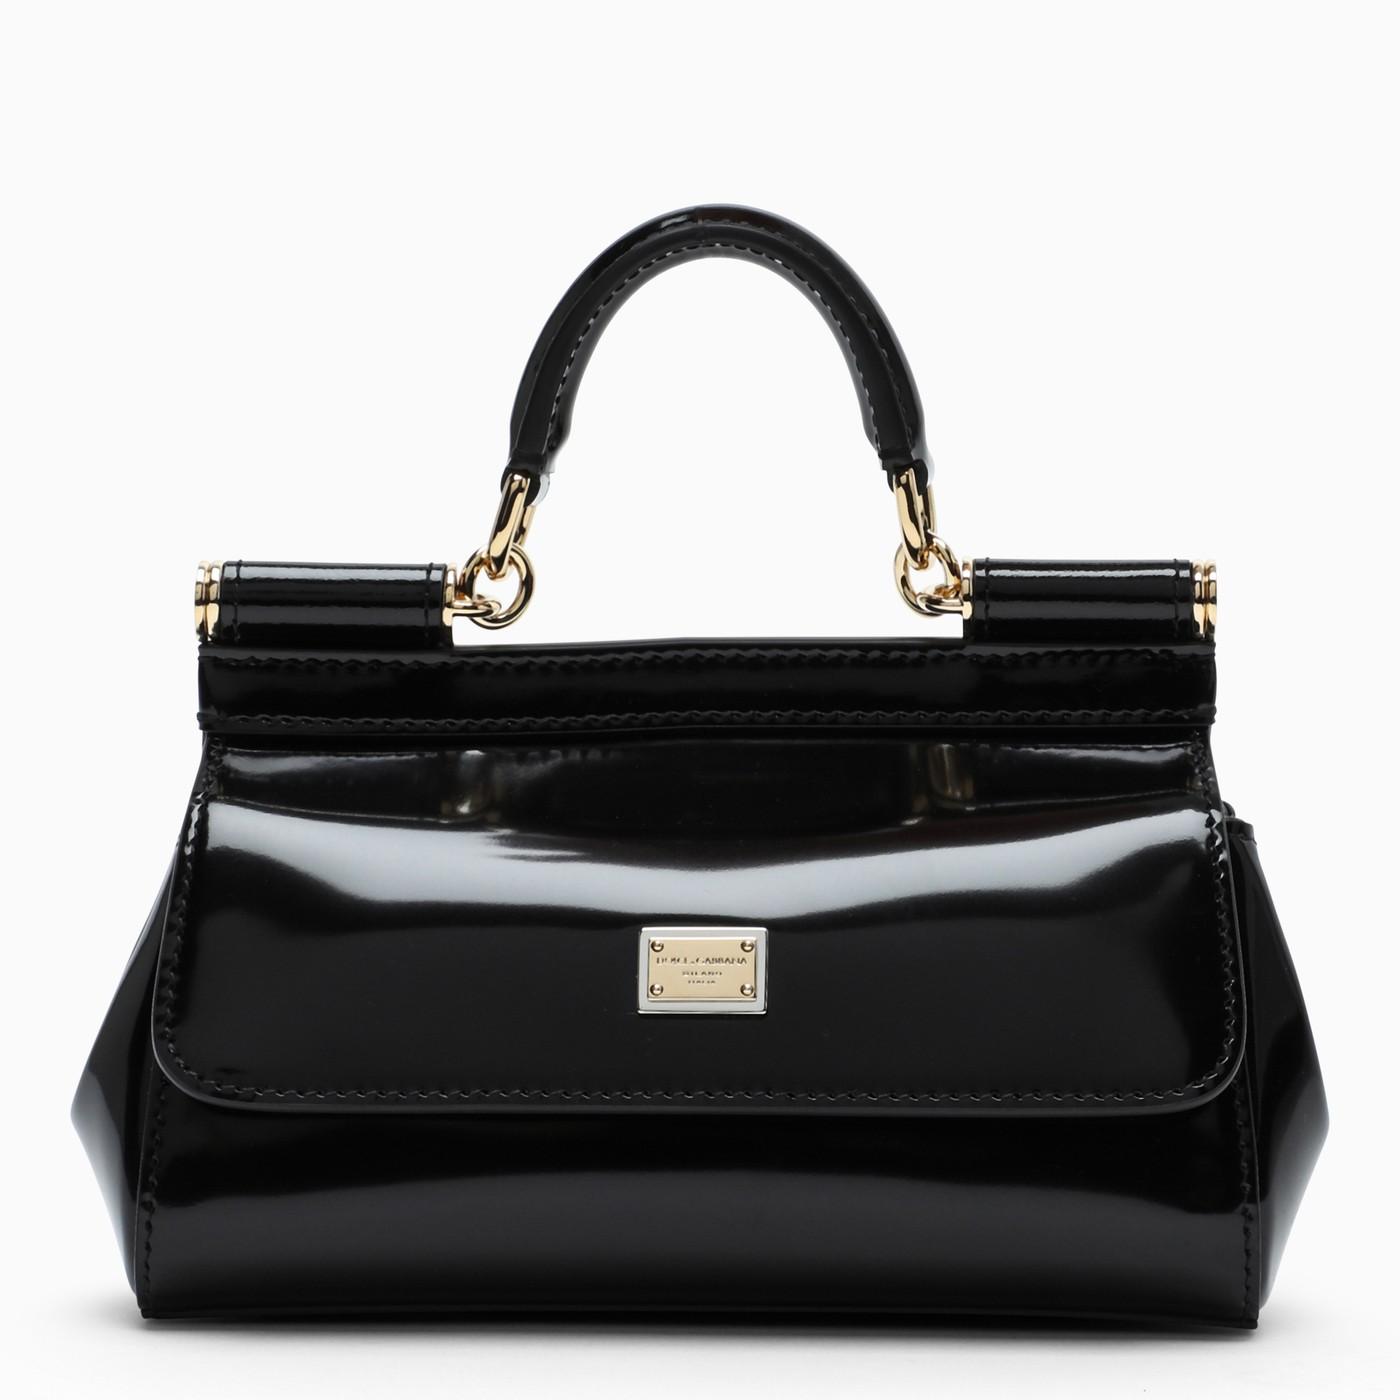 Dolce & Gabbana Black Patent Leather Miss Sicily Small Bag | Lyst